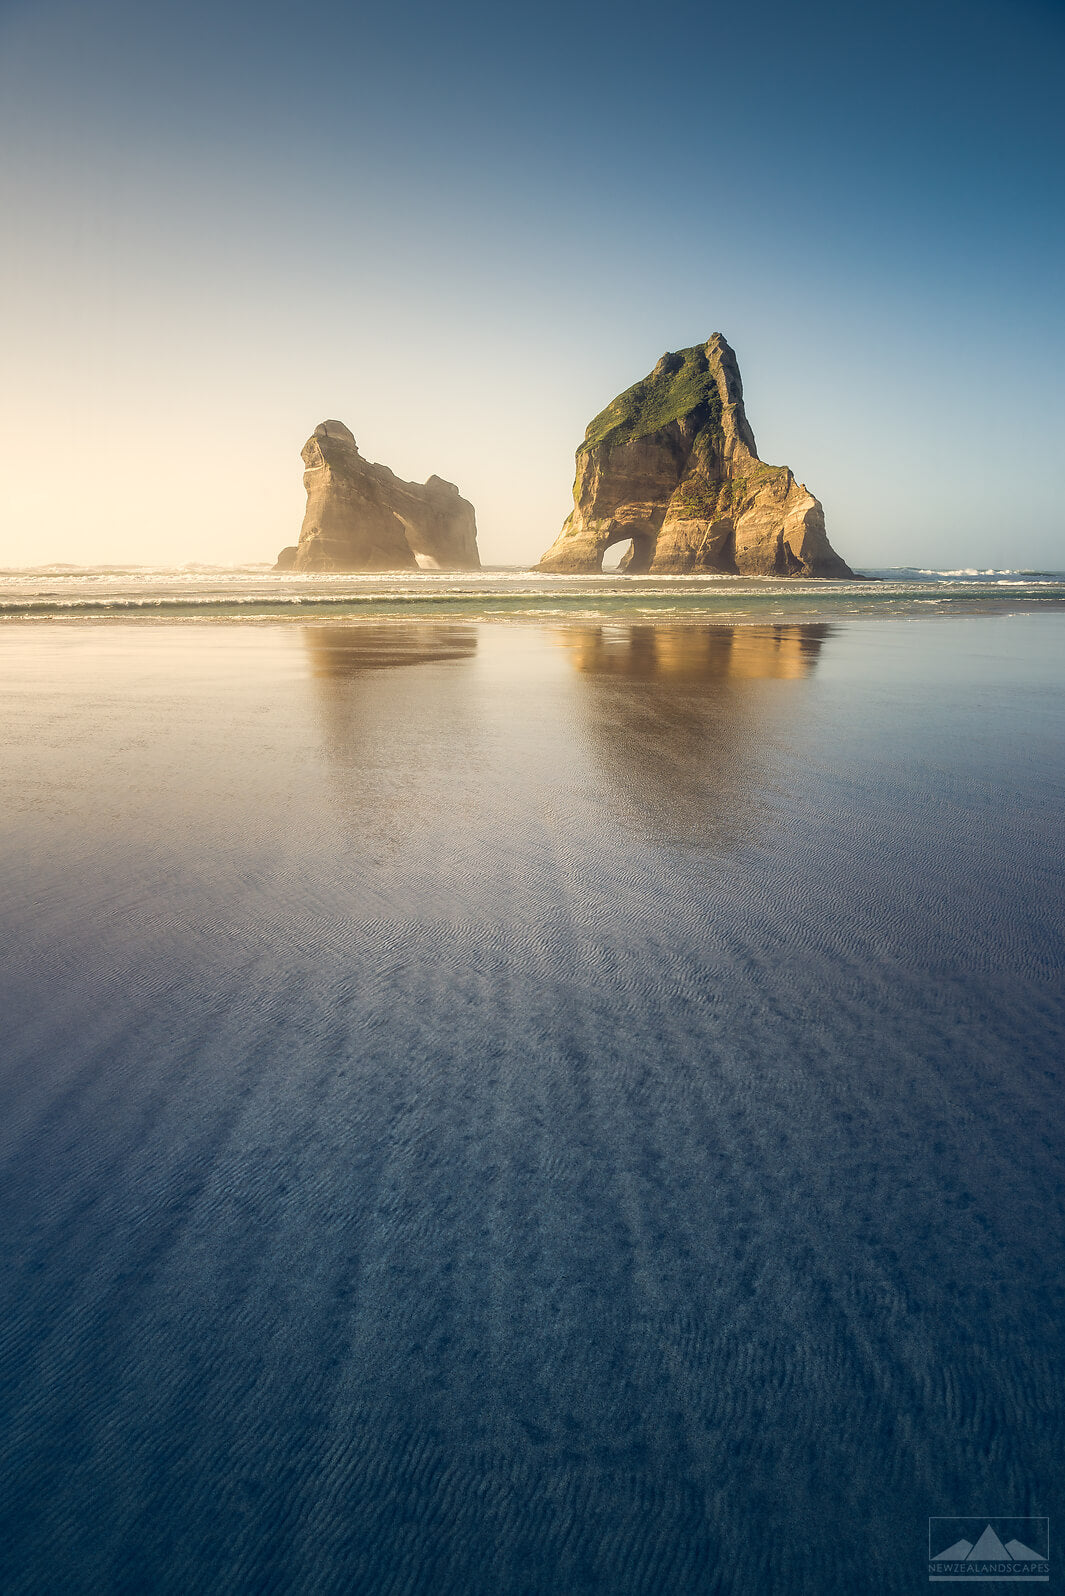 The Pull Towards Archway Islands - Newzealandscapes photo canvas prints New Zealand